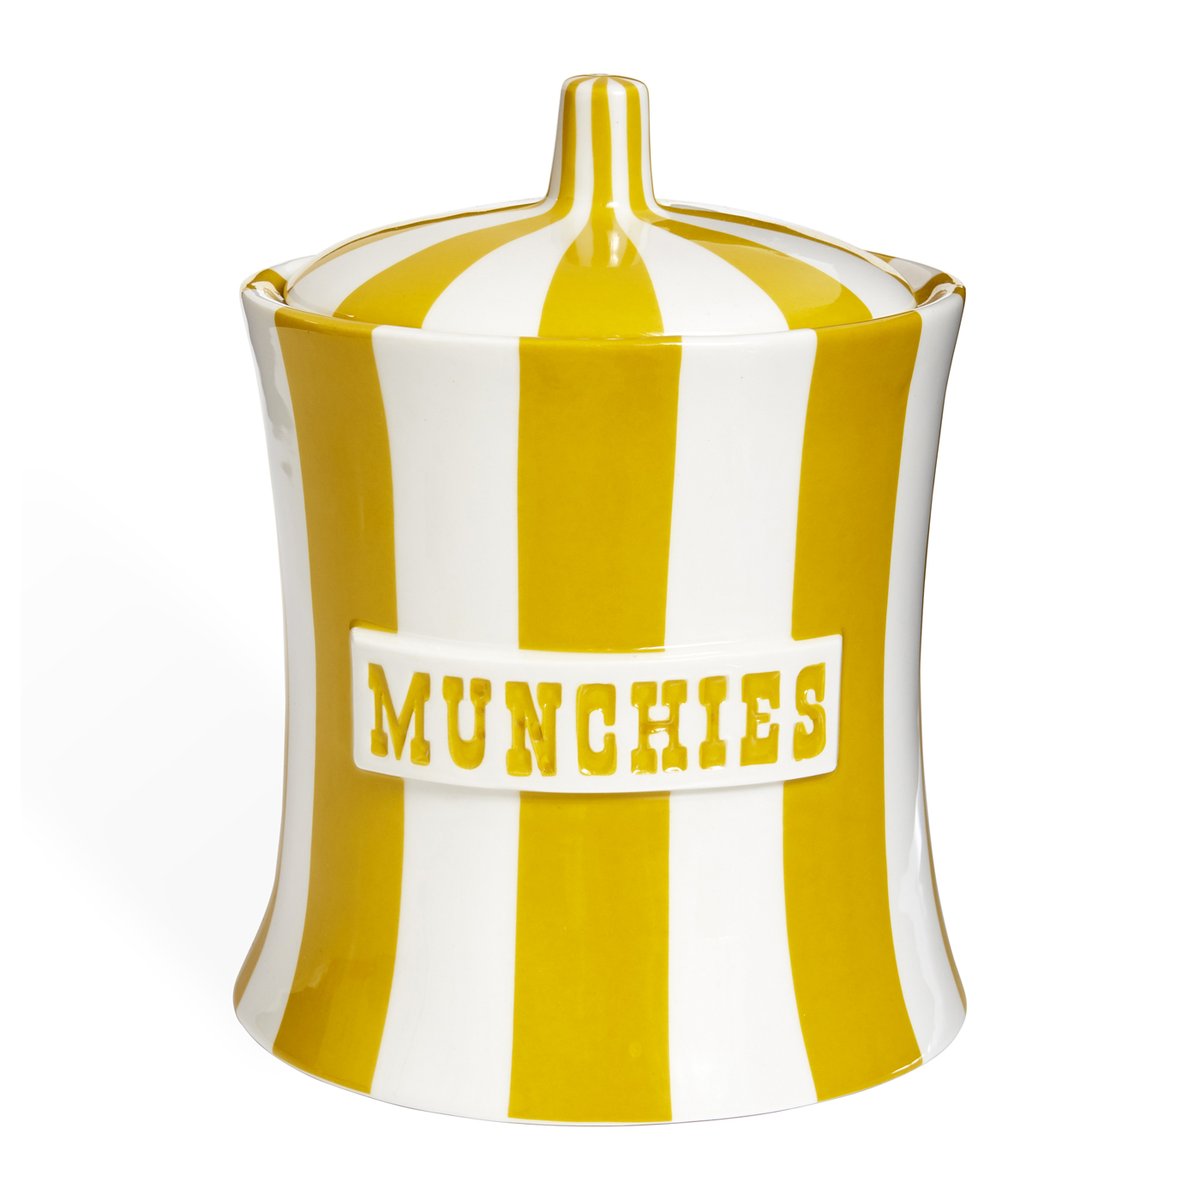 Vice Munchies Canister by Jonathan Adler